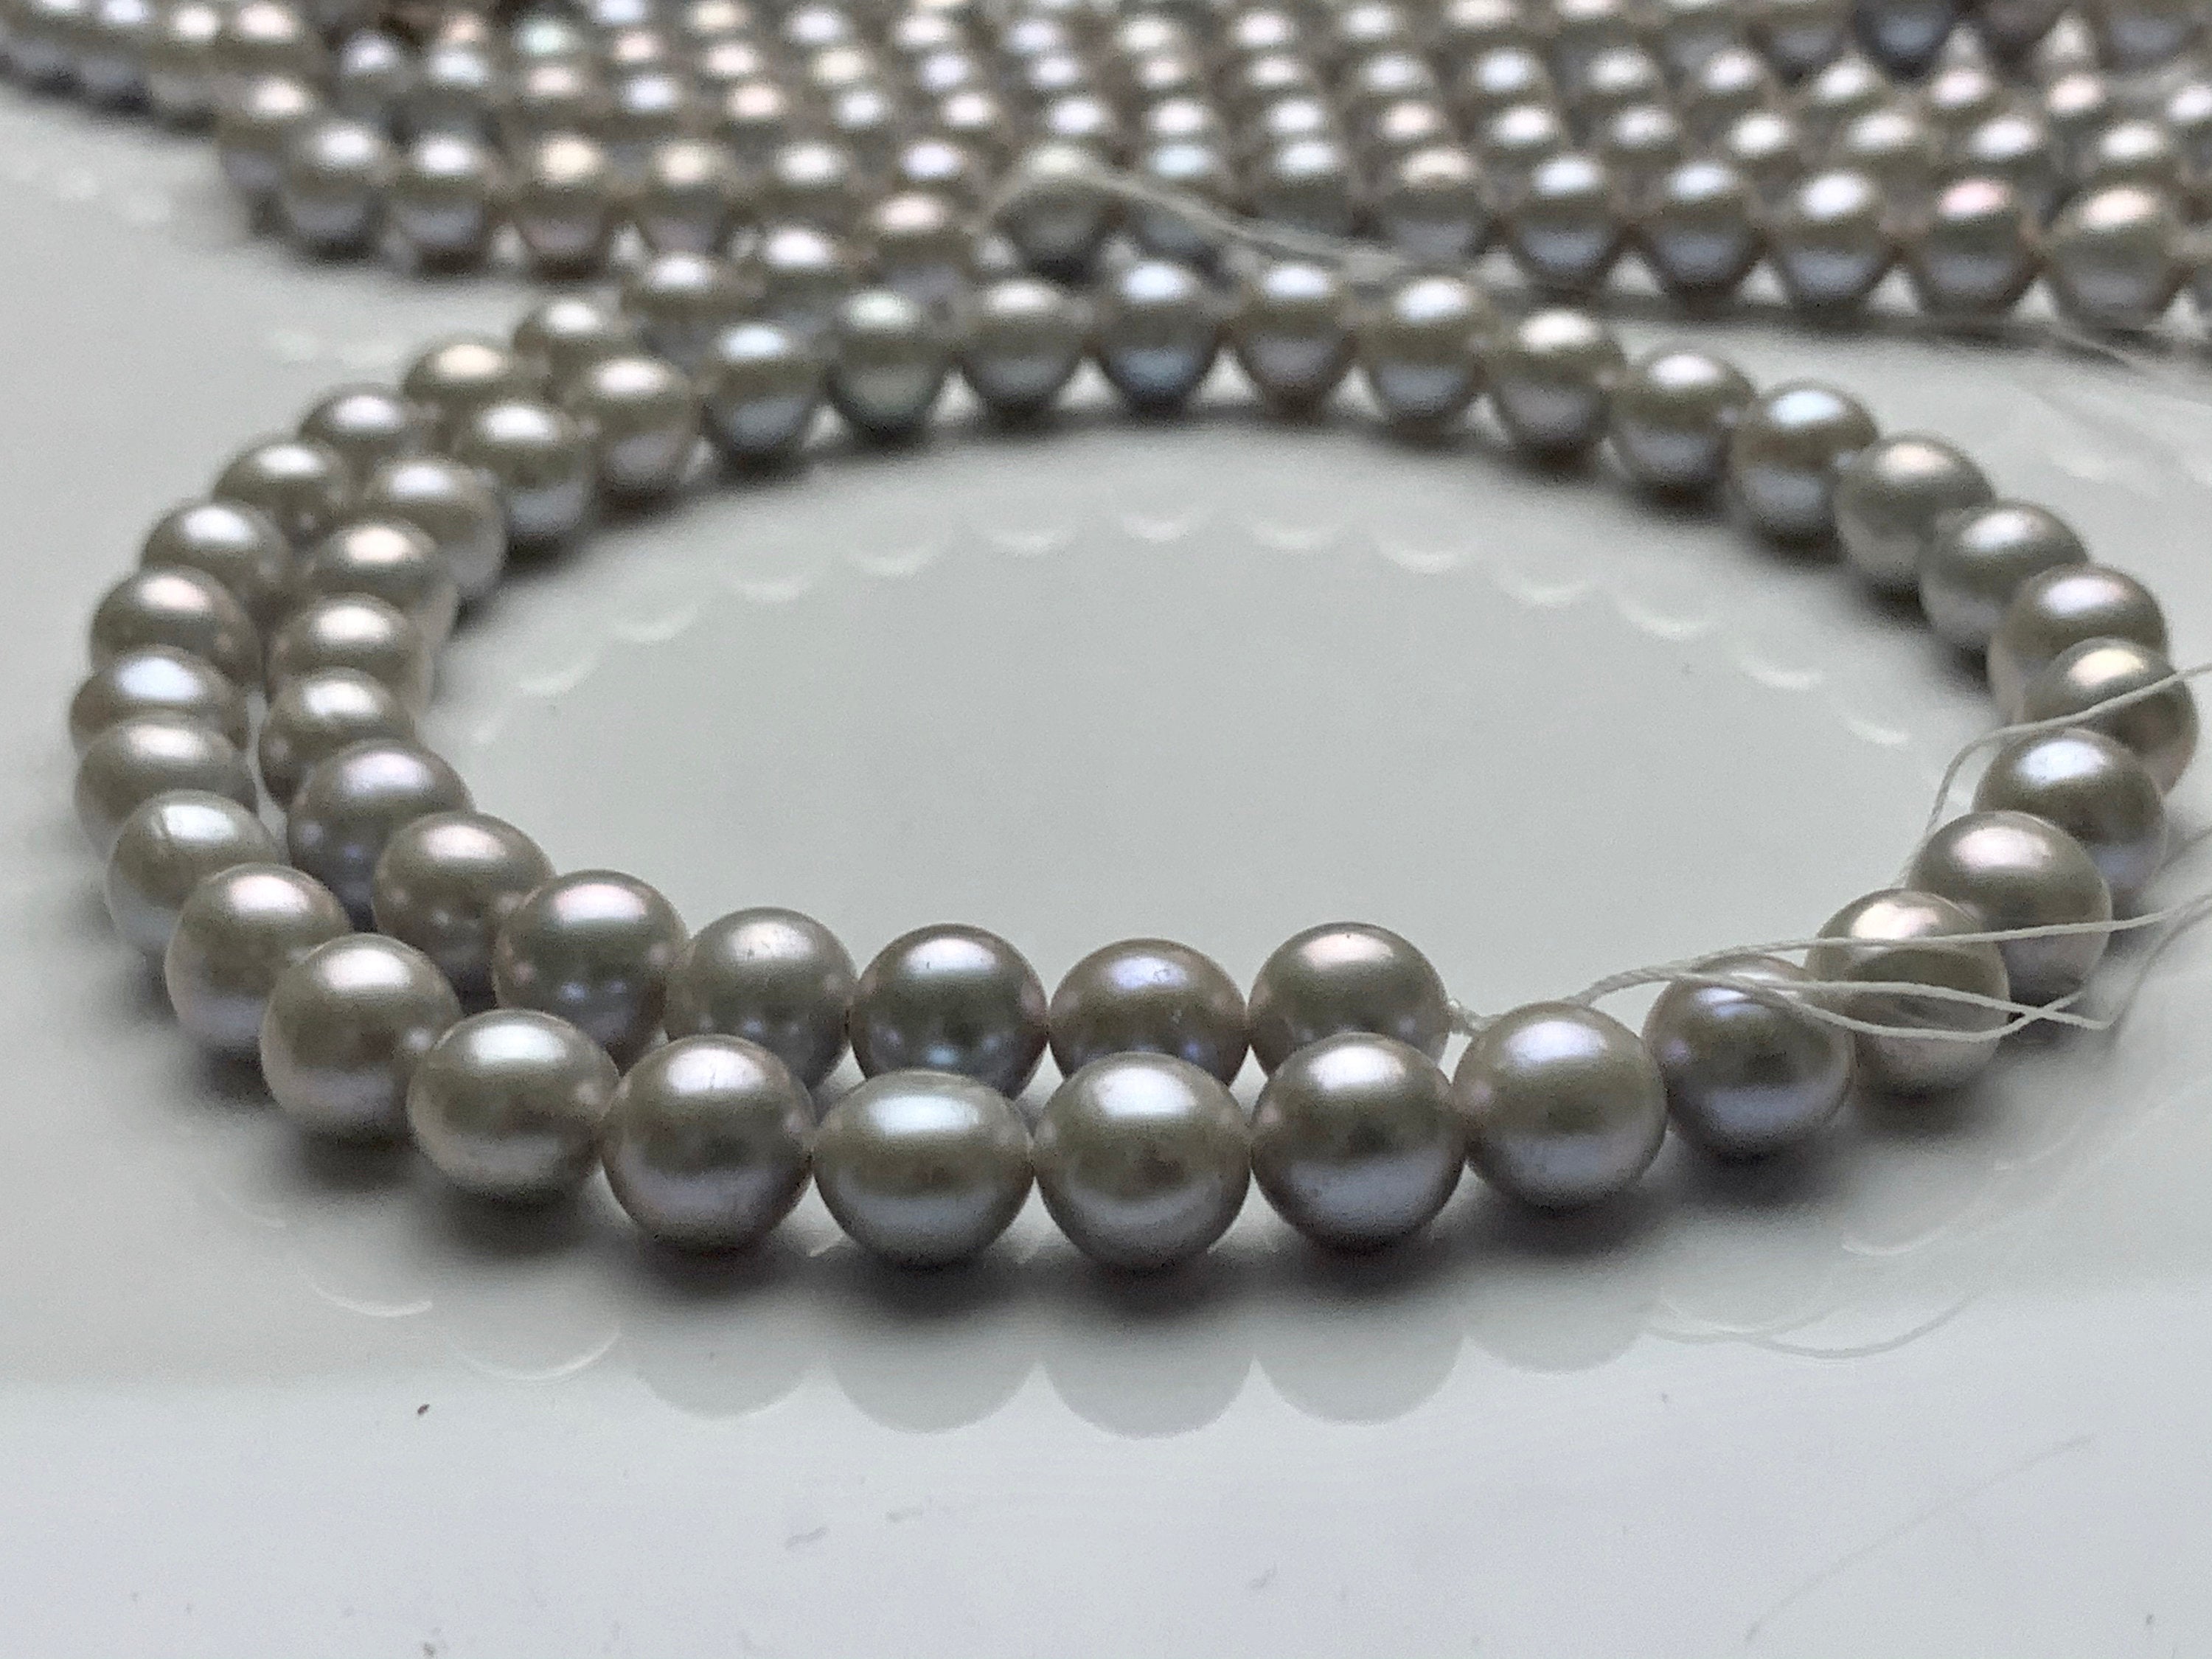 8-8.5 Mm AAA Gray Semi-round Freshwater Pearls Genuine Smooth and